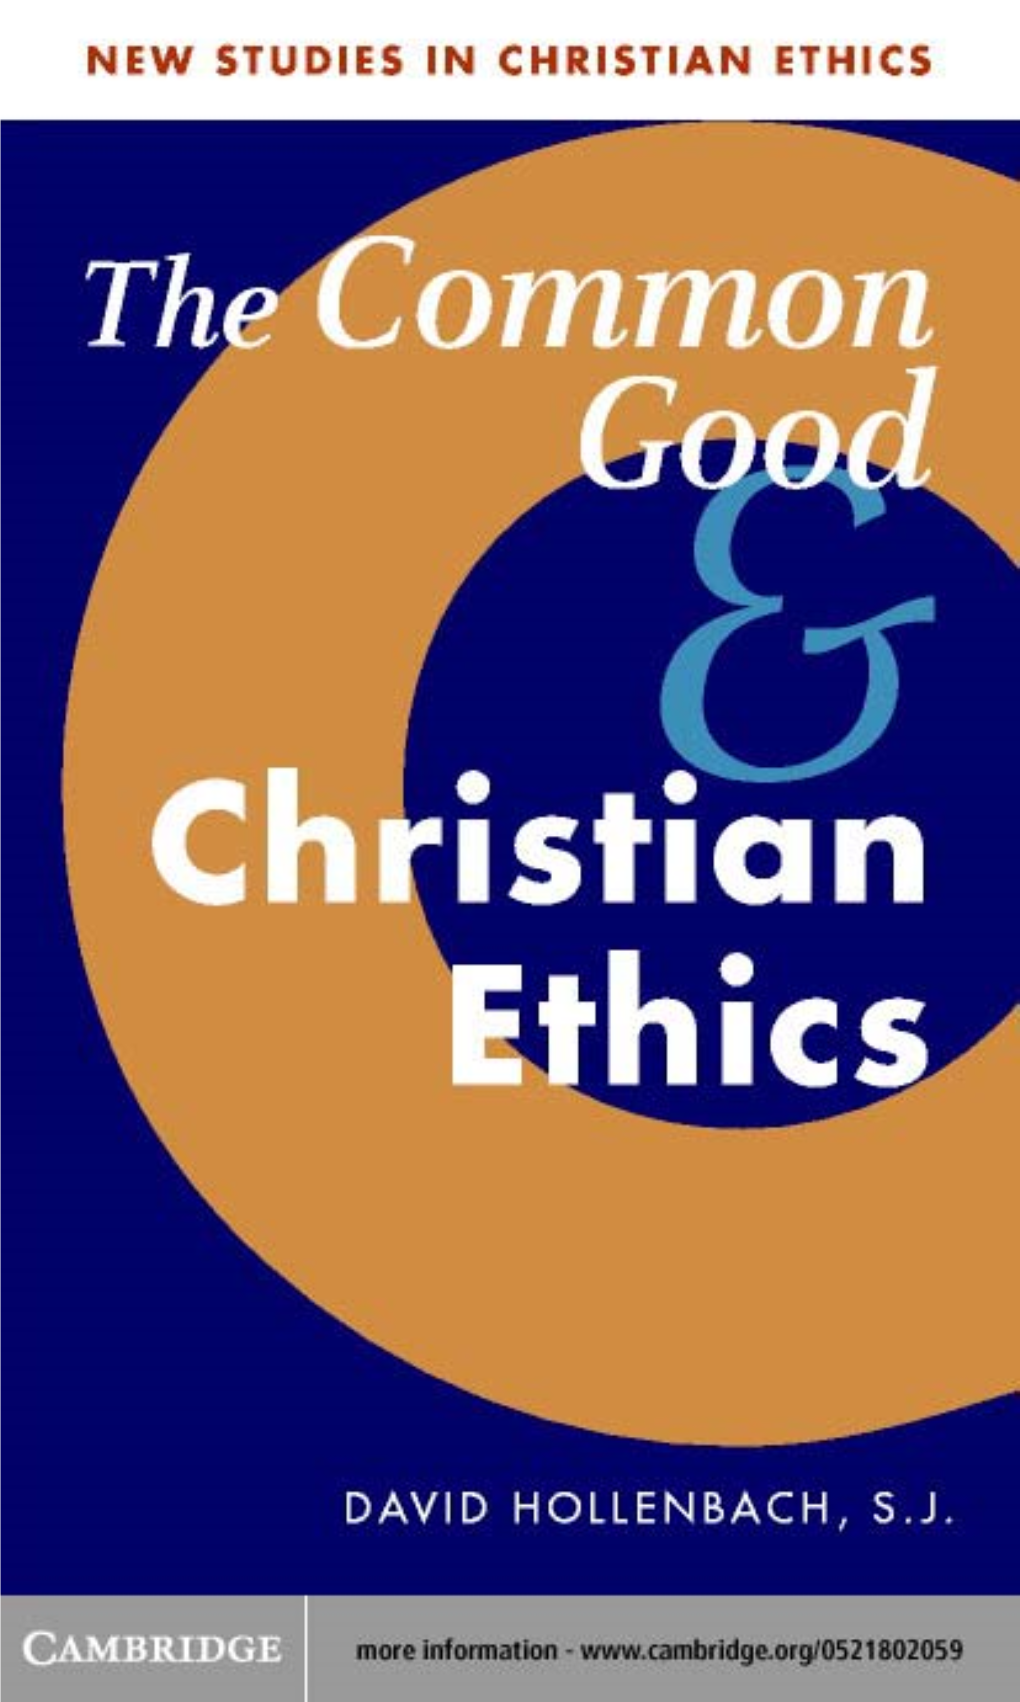 The Common Good and Christian Ethics